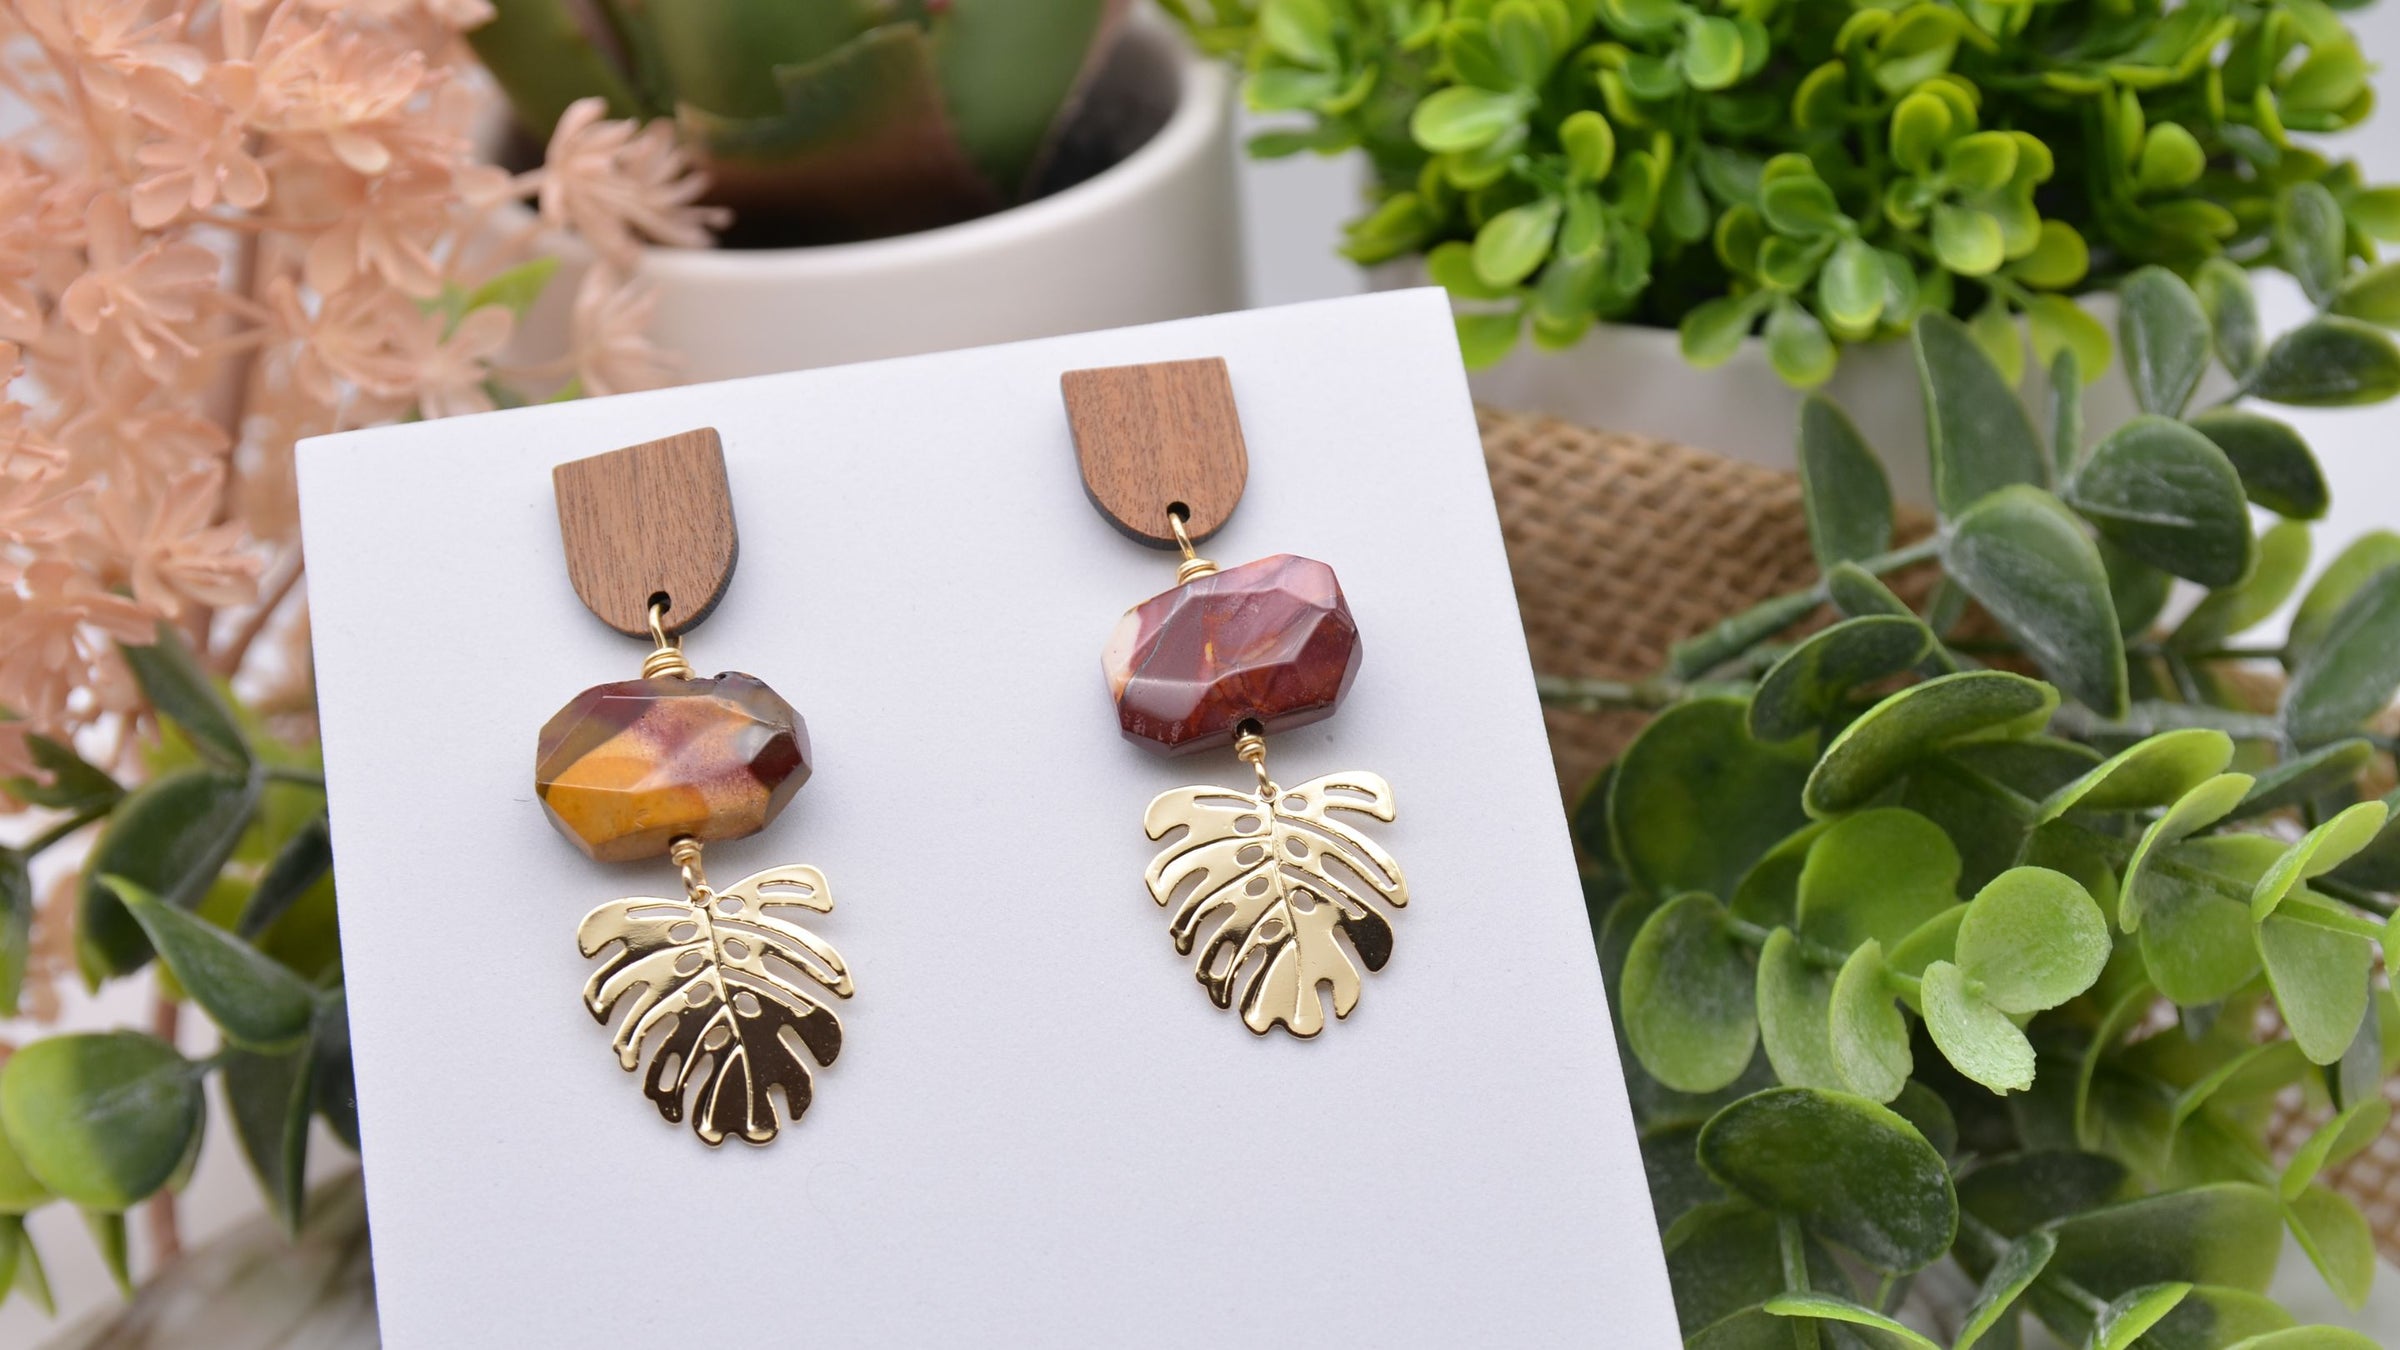 The image shows a pair of earrings with wooden semicircle ear post, orange and maroon colored Mookaite gemstones and gold leaf charms on a white display with greenery surrounding it. The words "New In Earrings, Fall Hues, Transition into Fall like a pro" at the bottom. 2 buttons that say "Shop All" on the left and "All Earrings" on the right. Natural gemstone jewelry by Emerald Sun Creations